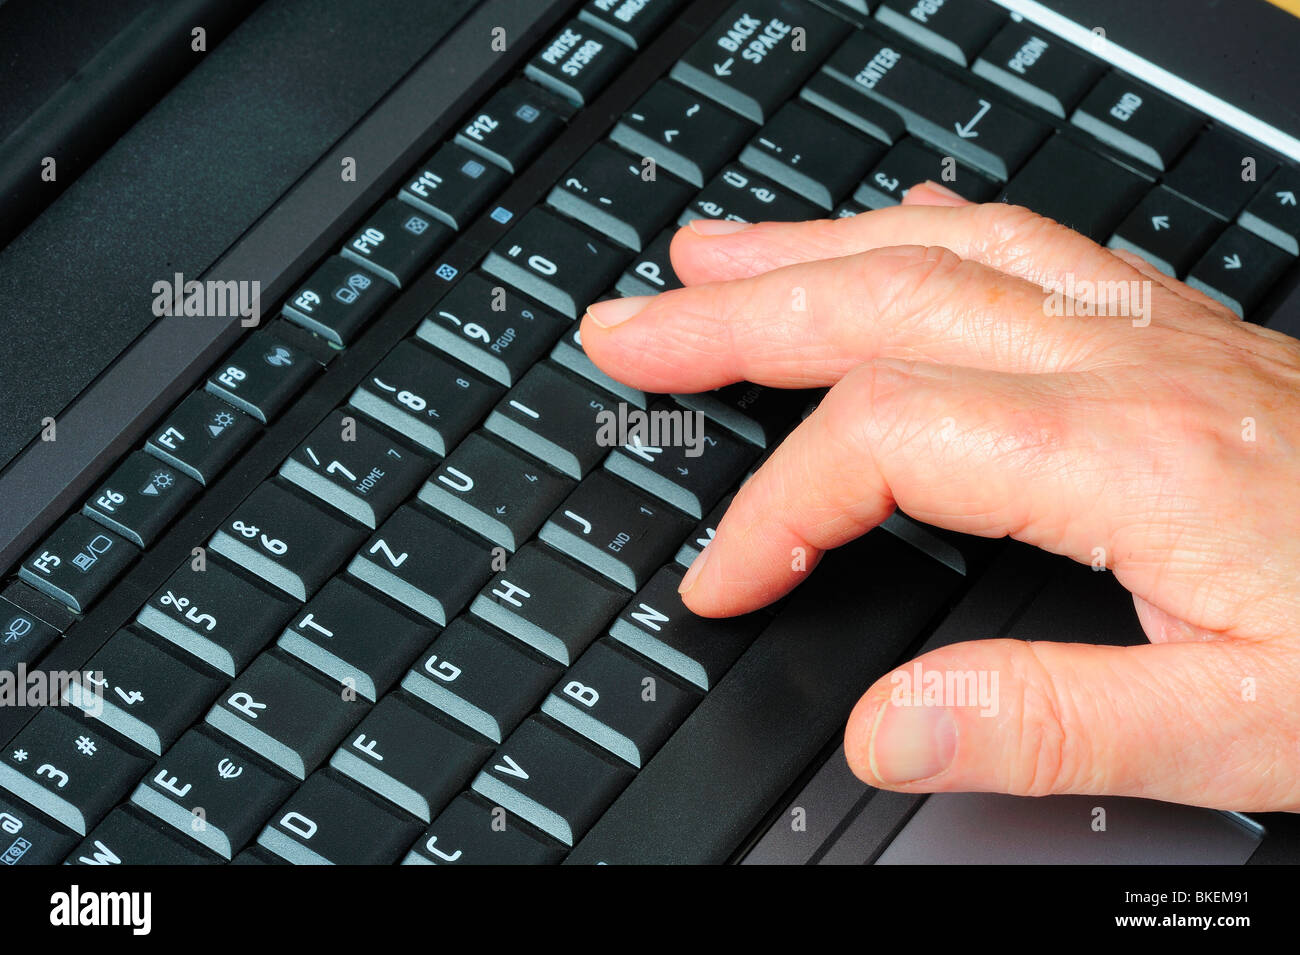 Close up view of a person using a French computer keyboard (QWERTZ) with  accented letters and other differences from the English Stock Photo - Alamy